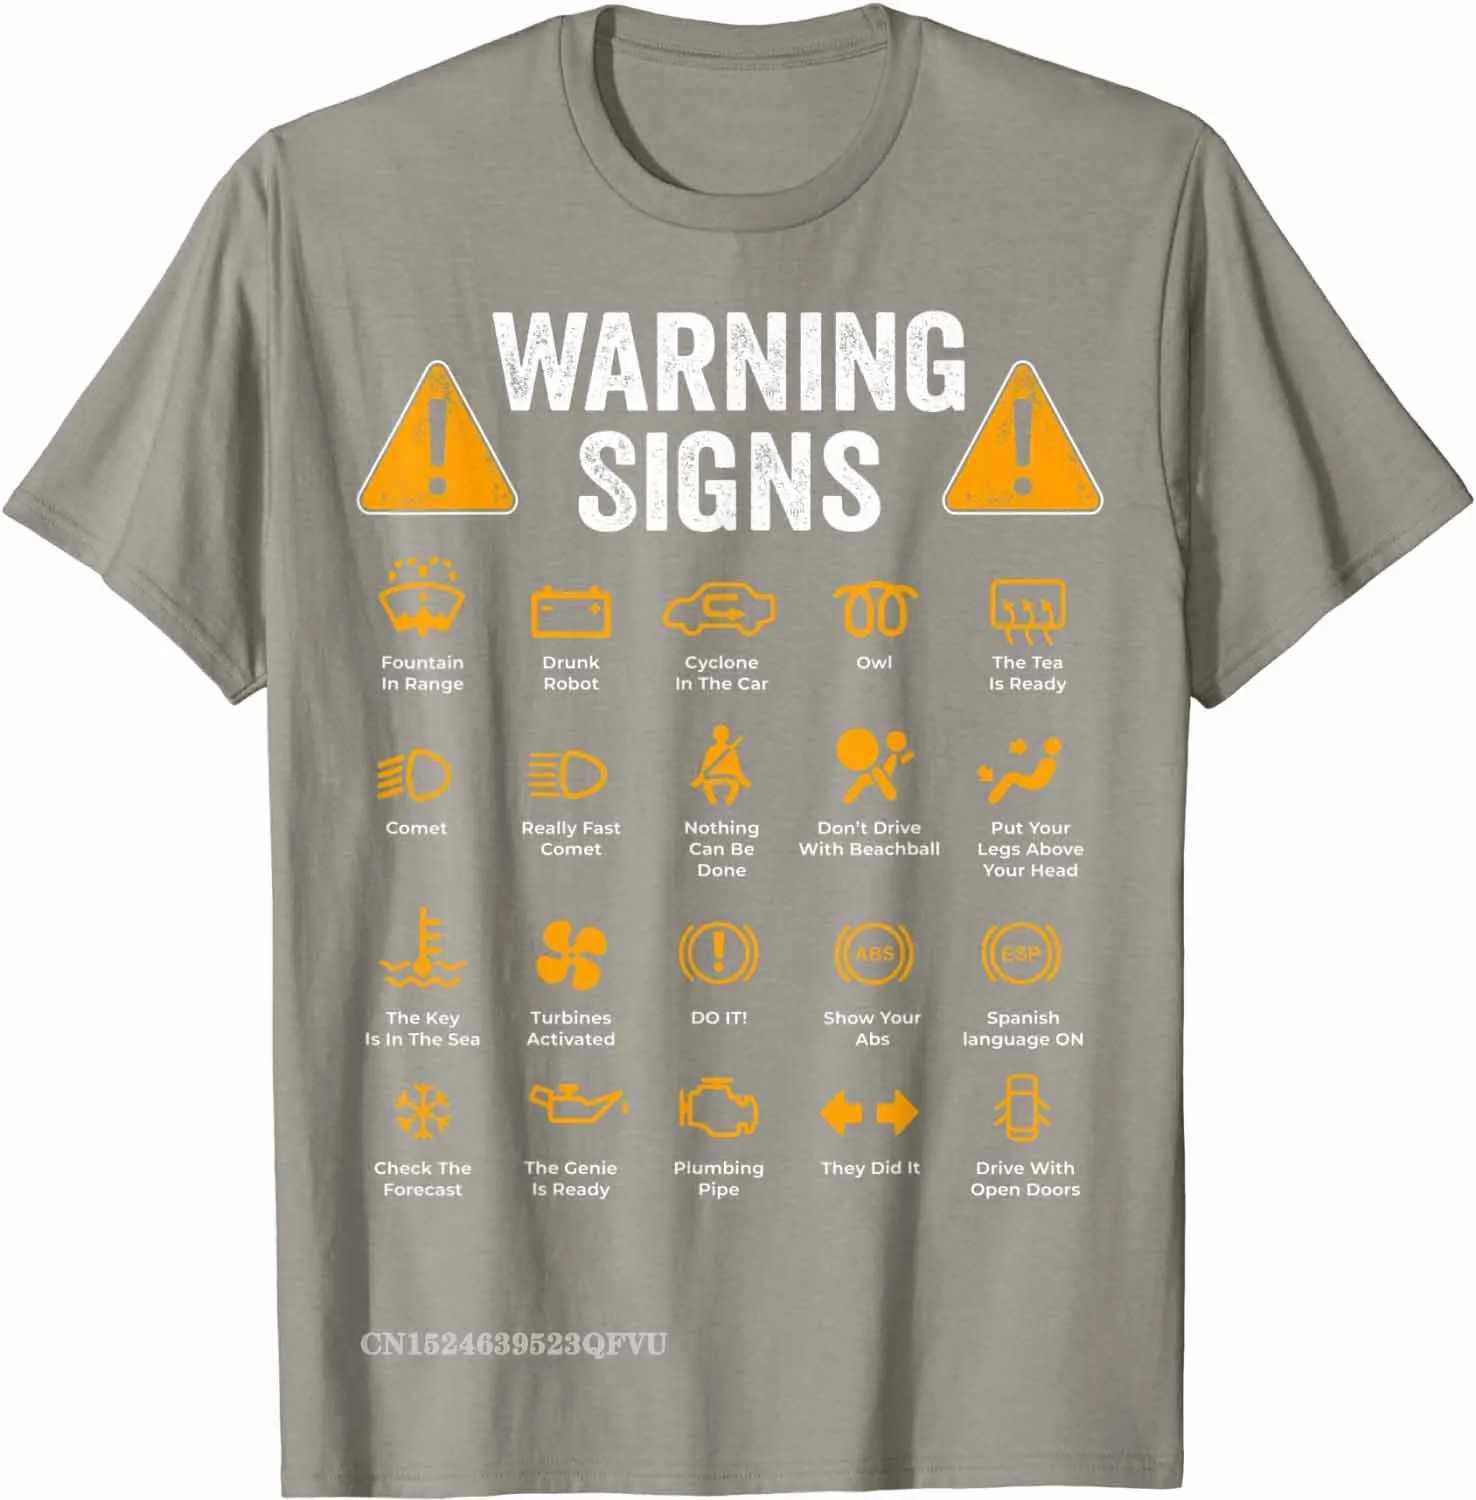 Men's T-Shirts Funny Driving Warning Signs Auto Mechanic Gift Driver T-Shirts Fashion Shirt Cotton Tops Tees Casual Hipster Clothes Comfortable